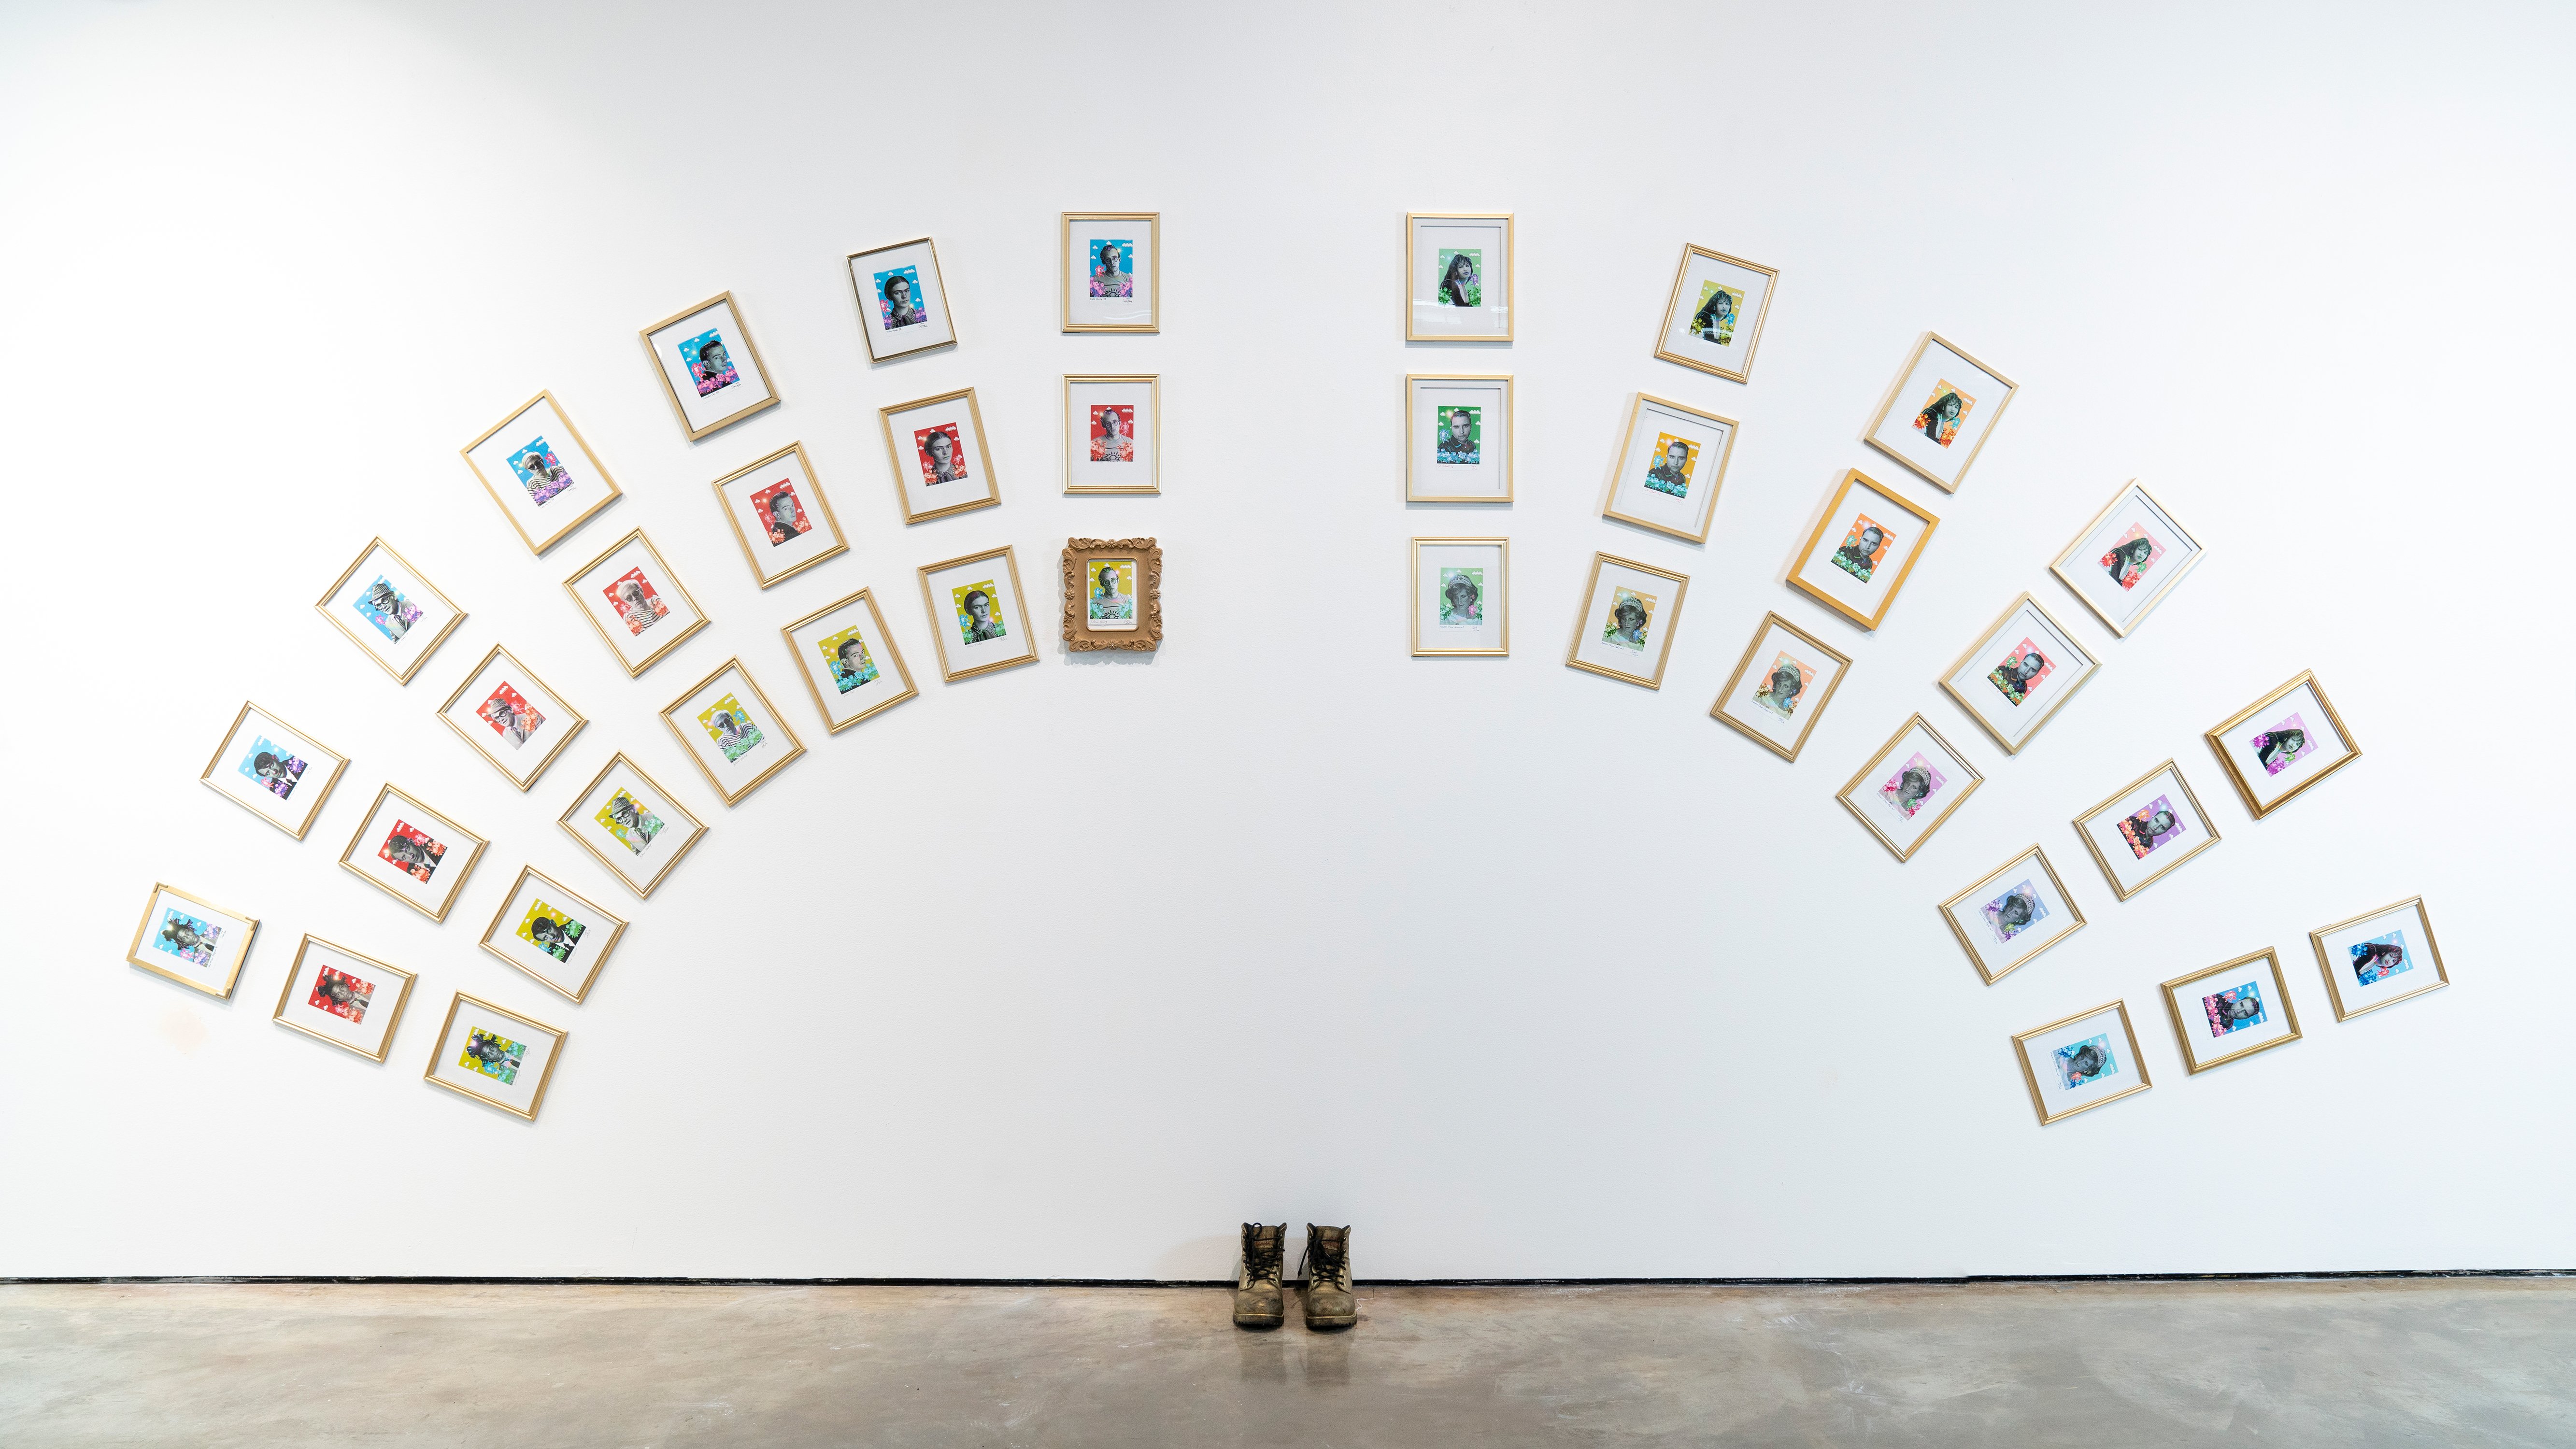 Sergio Mata (Installation View) 21 Art Saints, Selena Hexaptych, Sergio Mata Hexaptych, and Princess Diana Hexaptych, 2019, Digital photographs on paper, Dimensions variable